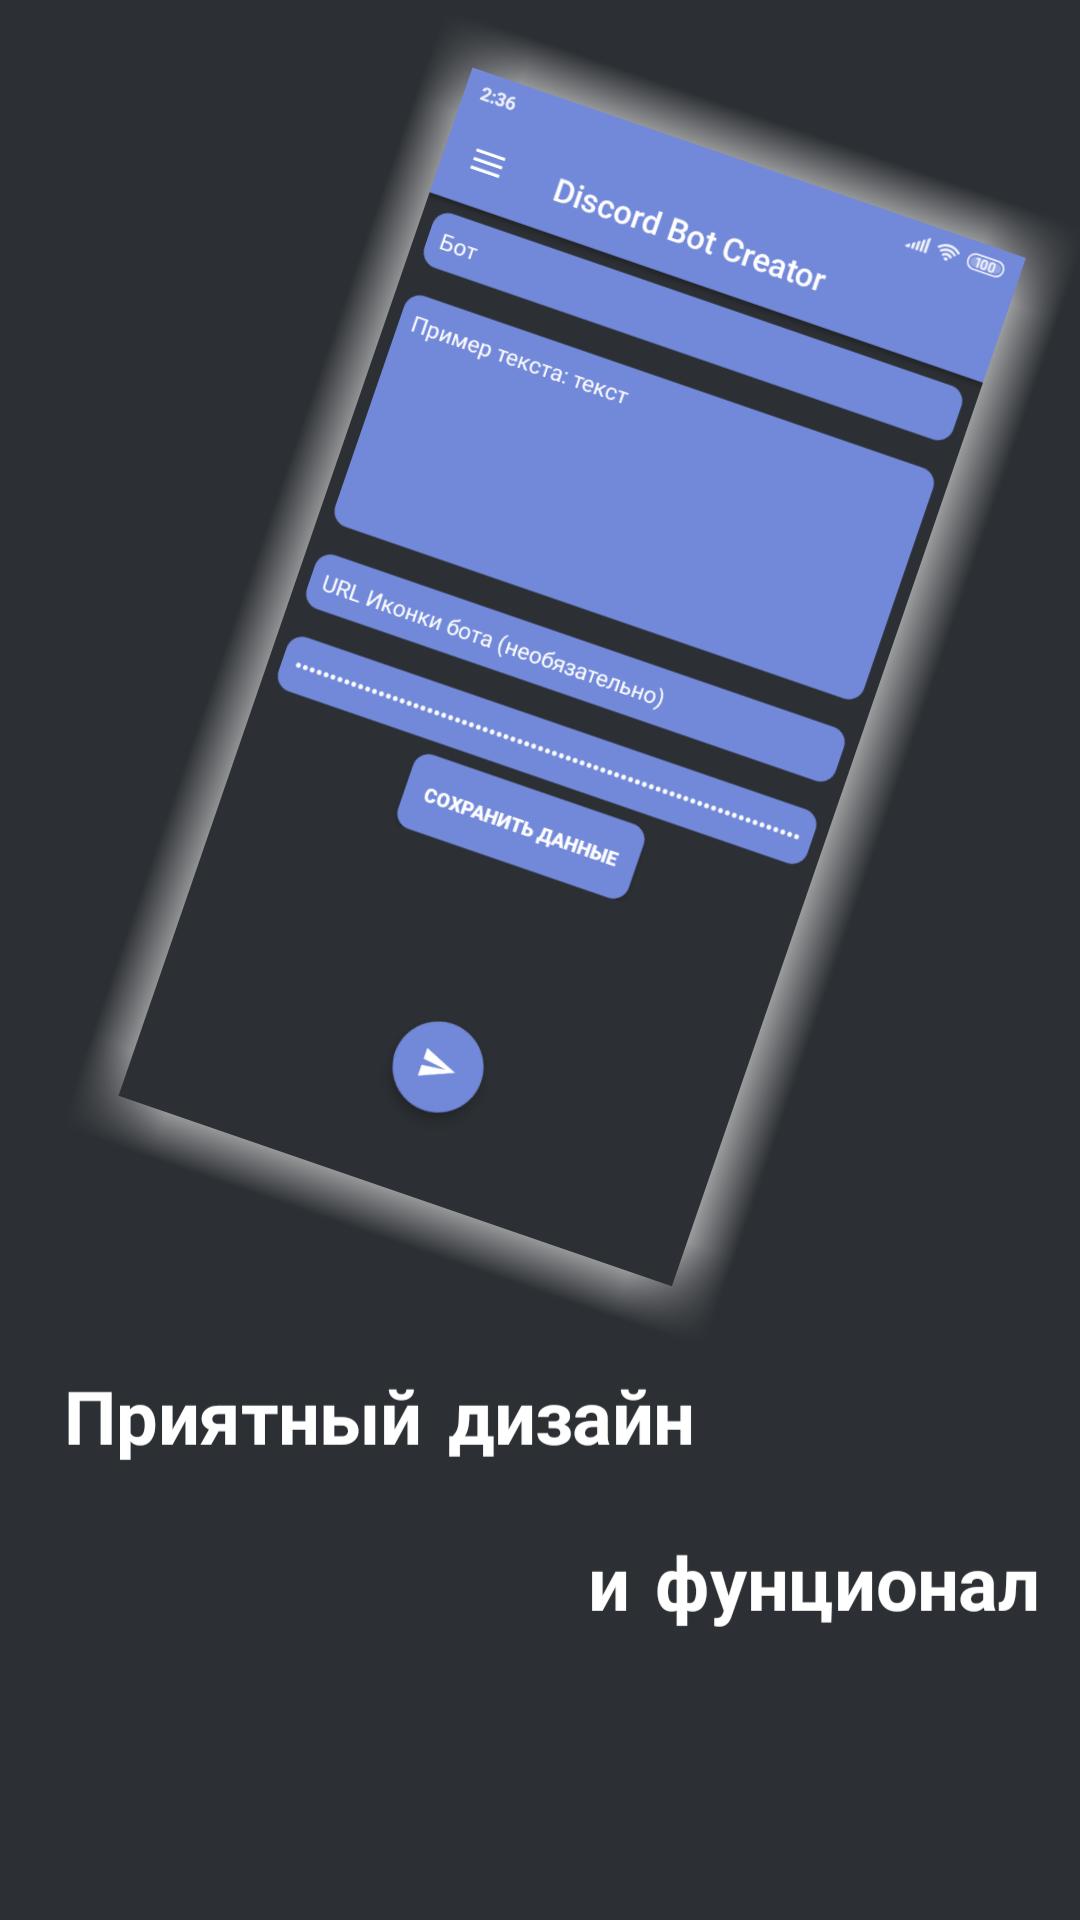 Discord Bot Creator for Android - APK Download